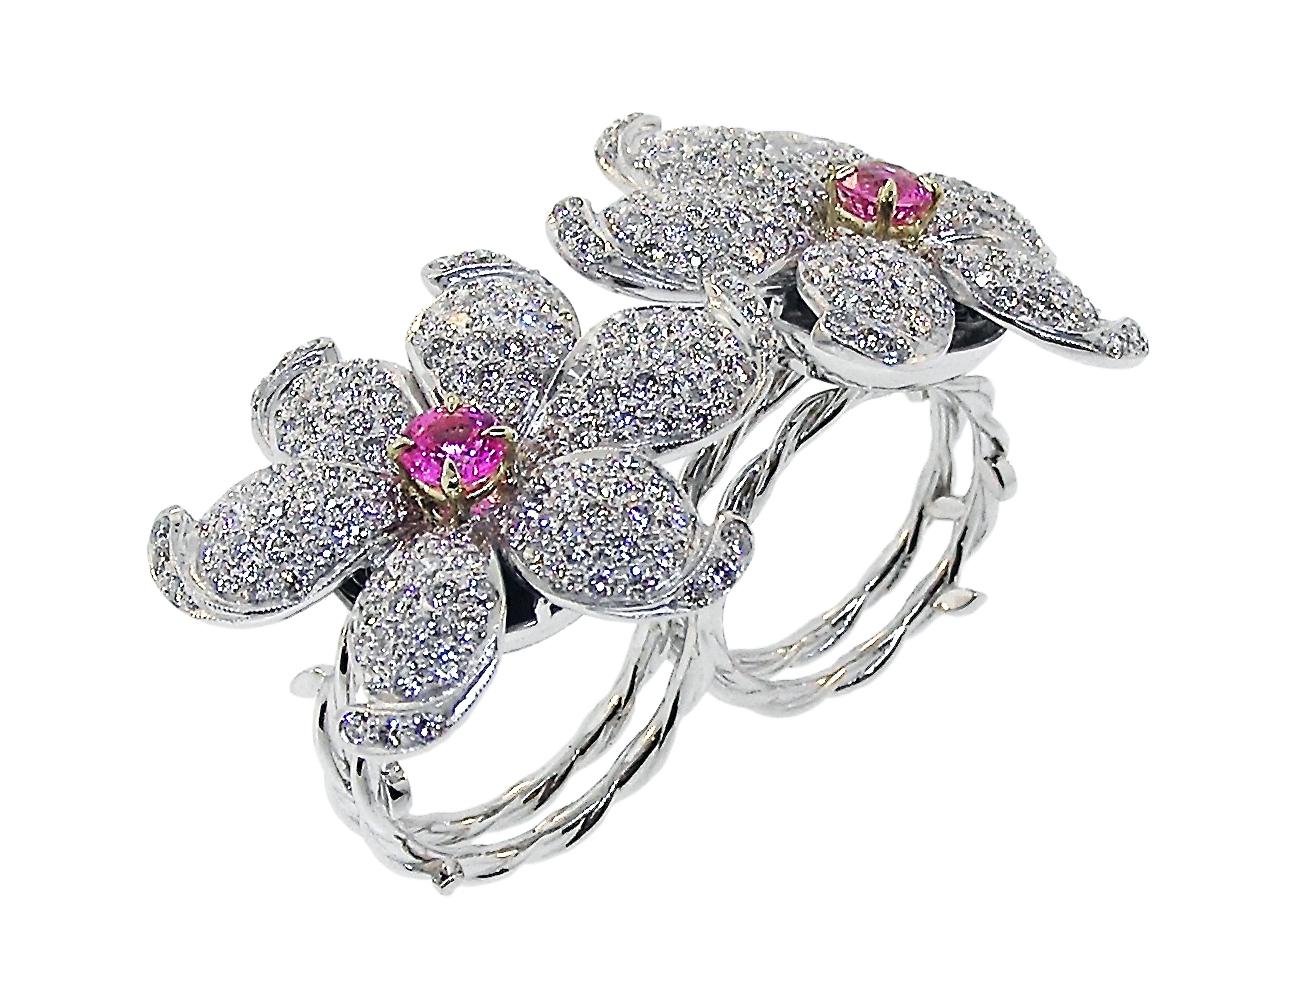 This great piece is of 18K White Gold with 8 Carats of Modern Round Brilliant good quality Diamonds.  The Flowers with a round Pink Sapphire set in 18K Yellow Gold. The shanks of a flower stalk design.

The Ring can be worn on any two fingers.  You